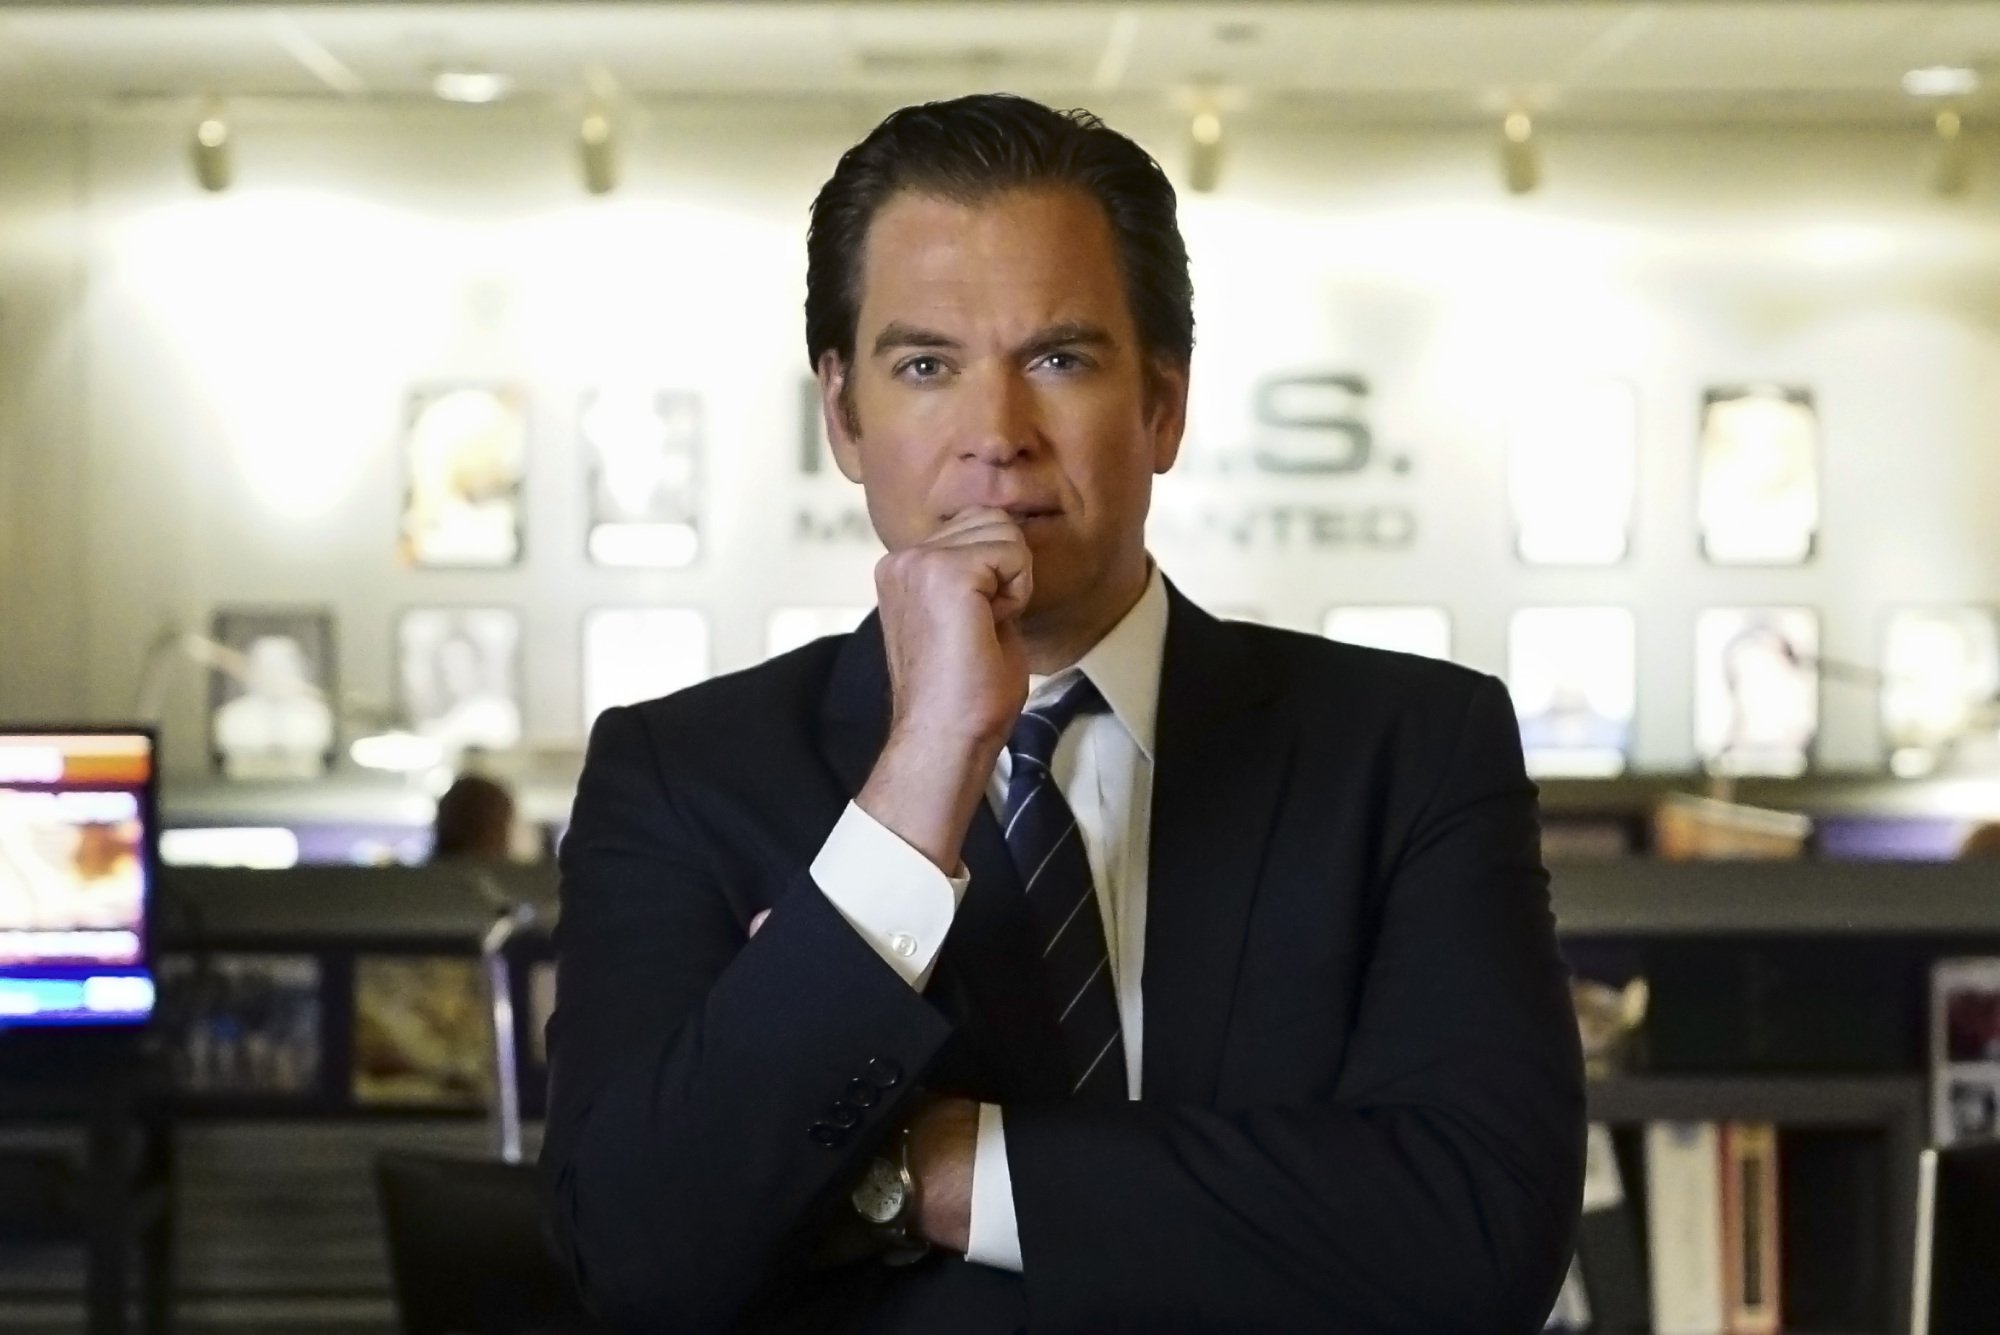 Michael Weatherly as Tony DiNozzo on NCIS | Sonja Flemming/CBS via Getty Images